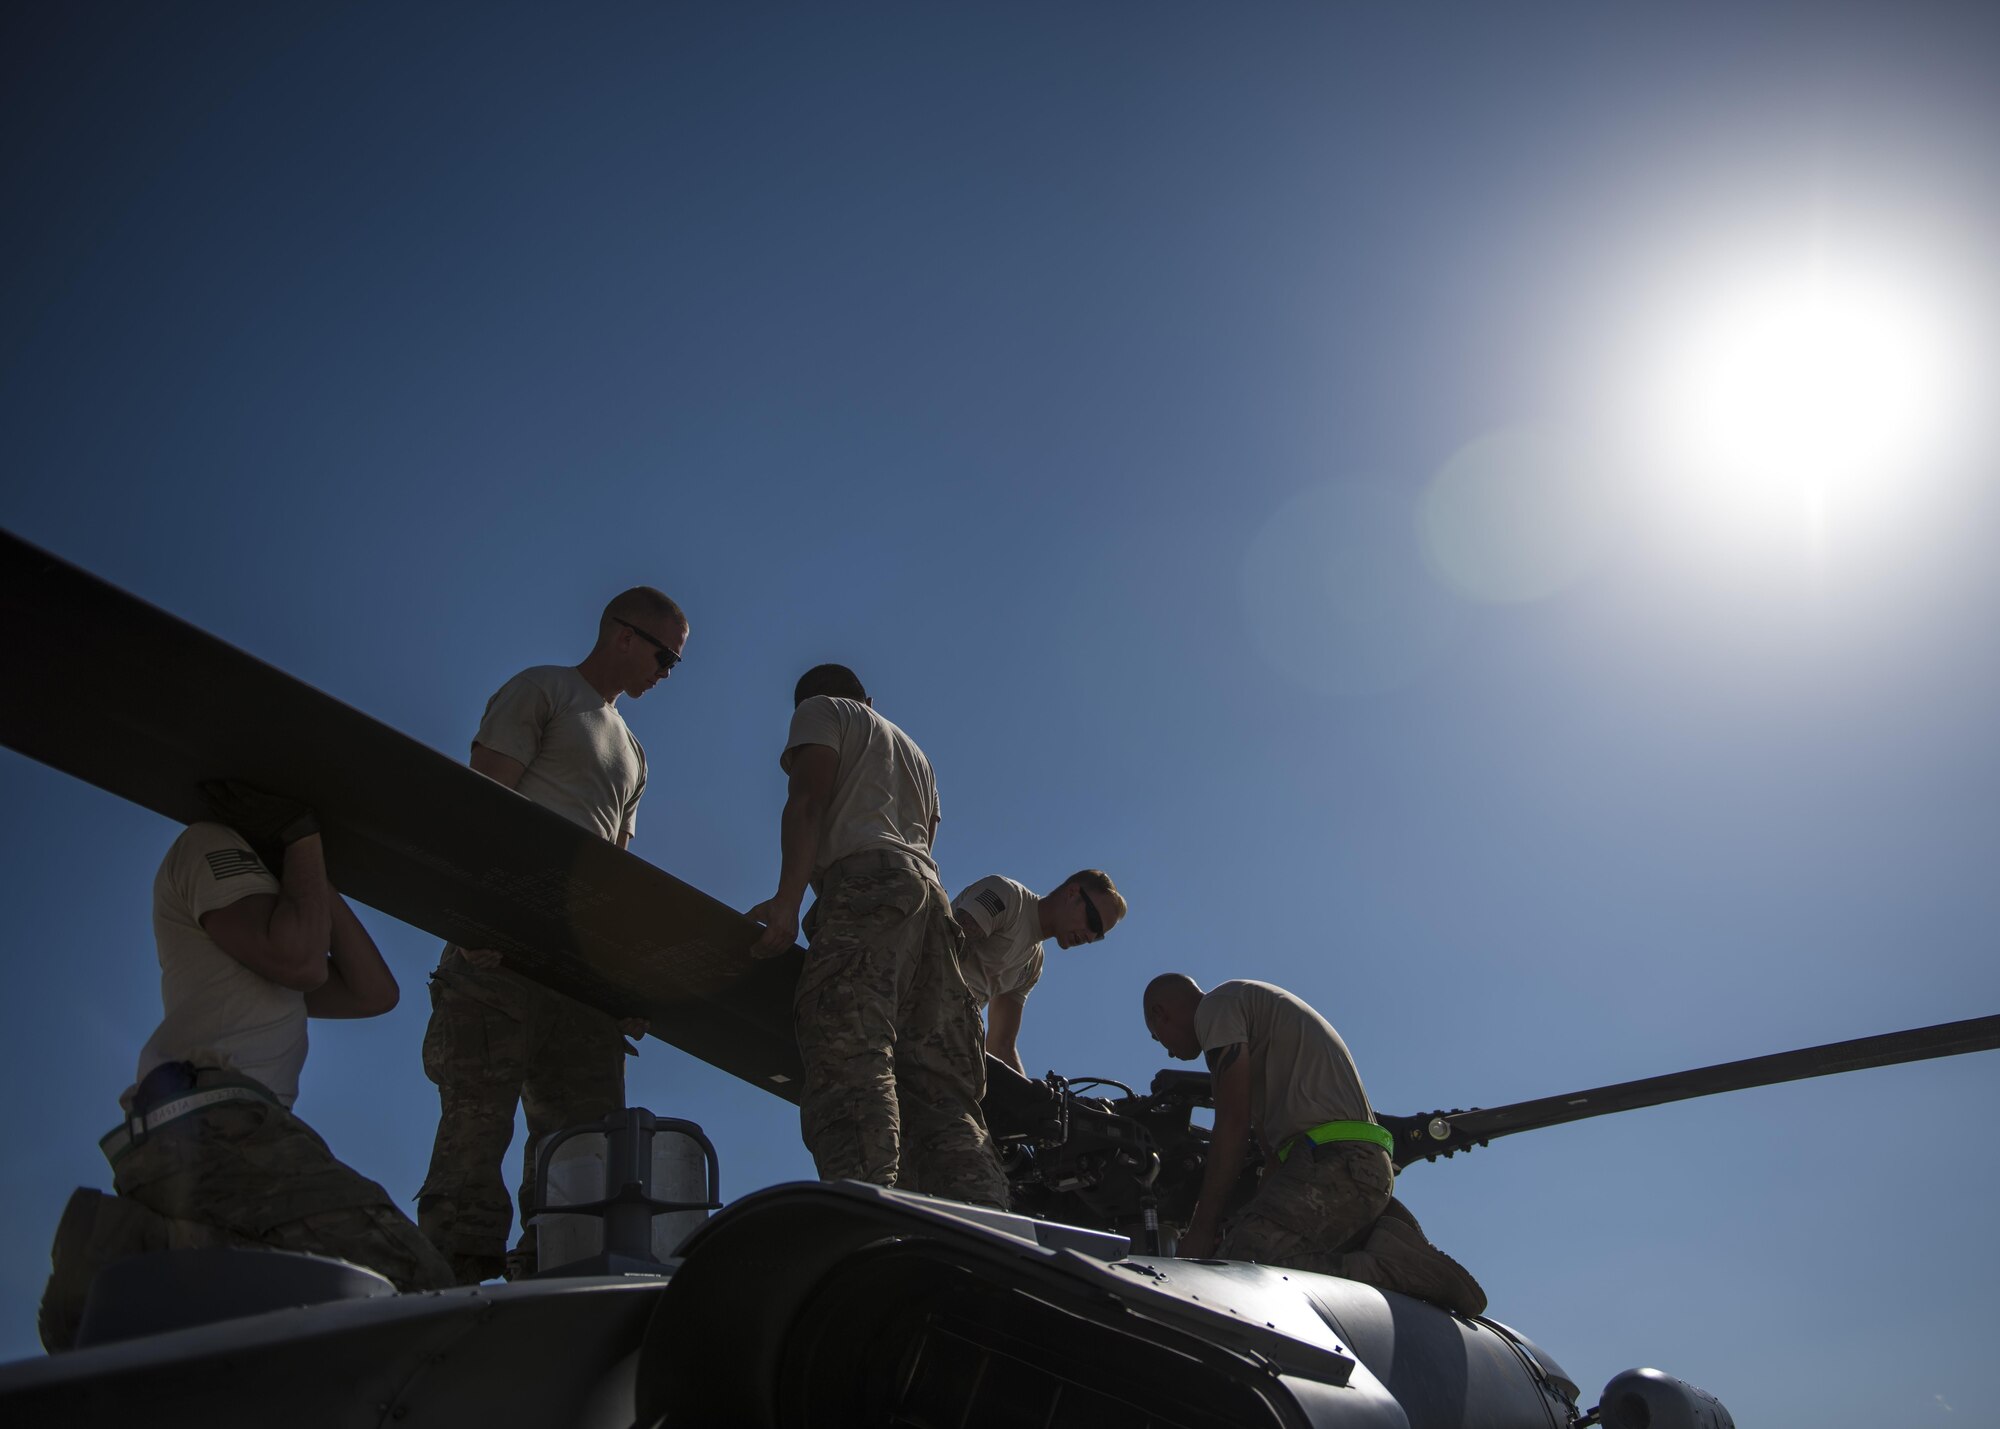 Airmen from the HH-60 Aircraft Maintenance Unit unfold the blades of a HH-60G Pave Hawk, Bagram Airfield, Afghanistan, Sept. 26, 2016. The 83rd Expeditionary Rescue Squadron provides the only U.S. personnel recovery assets in Afghanistan. HH-60G maintainers work a non-stop alert schedule and are ready to respond 24 hours a day, seven days a week. (U.S. Air Force photo by Senior Airman Justyn M. Freeman)